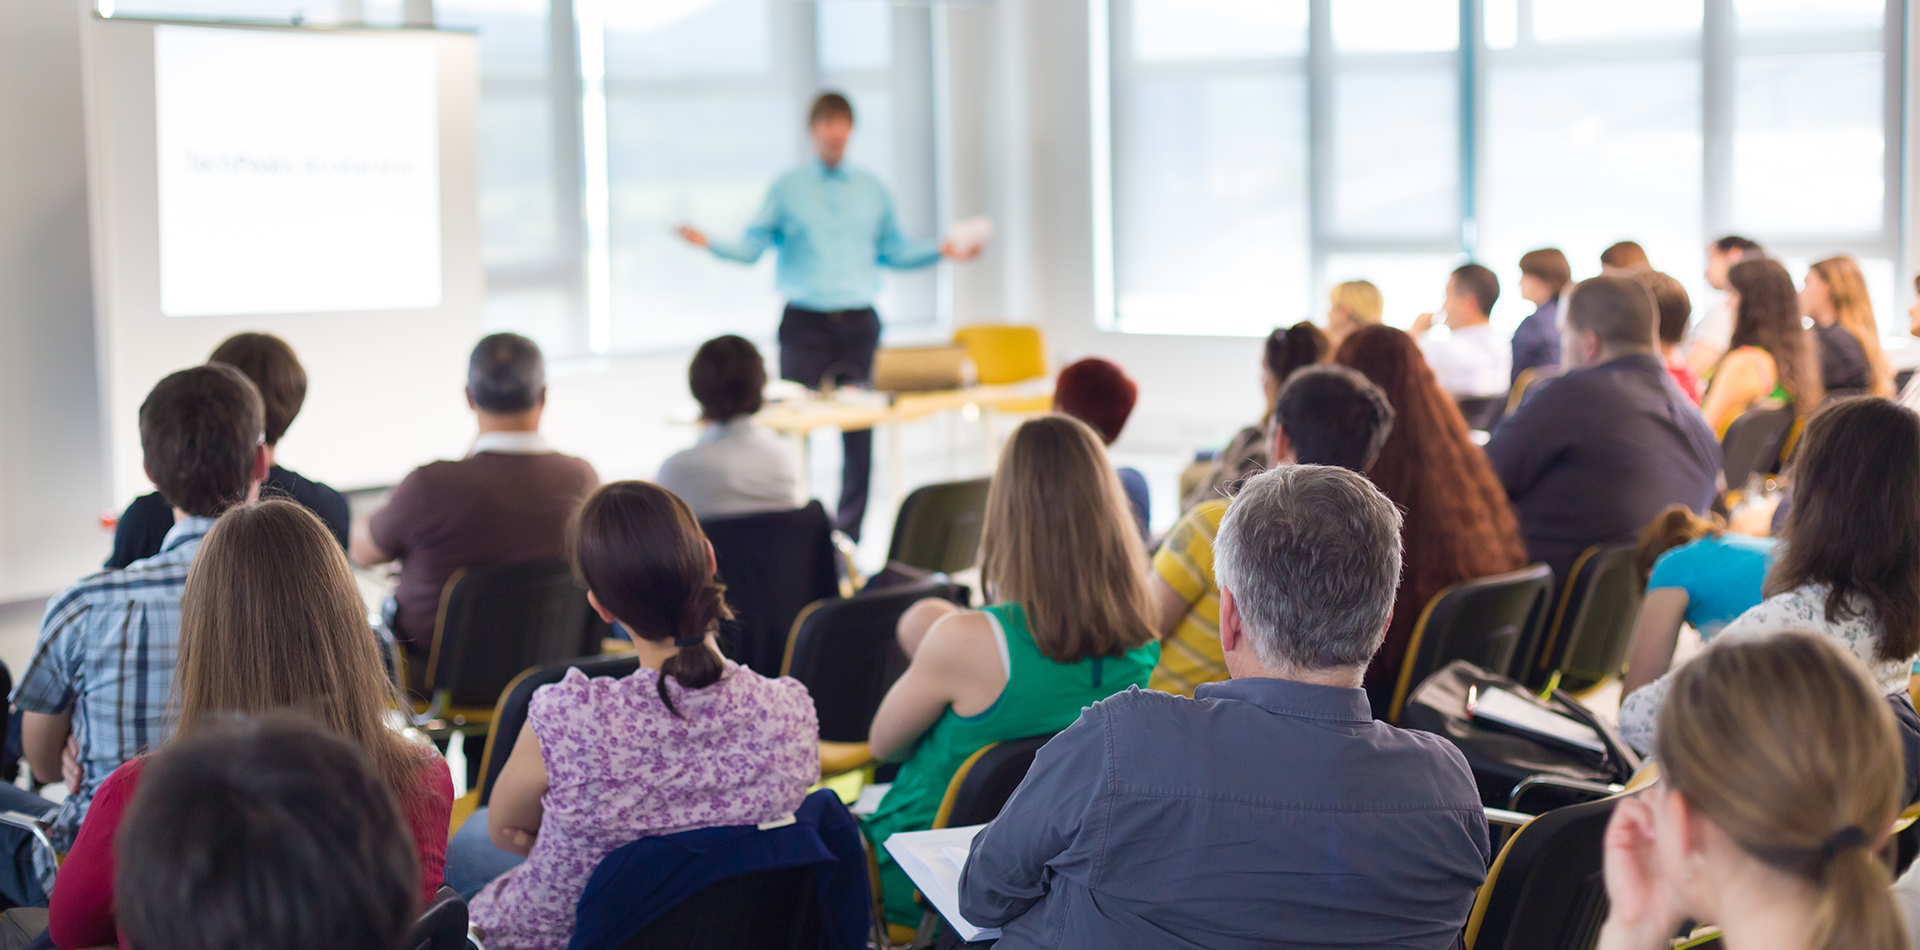 3 Corporate Training Programs Every Employee Should Take